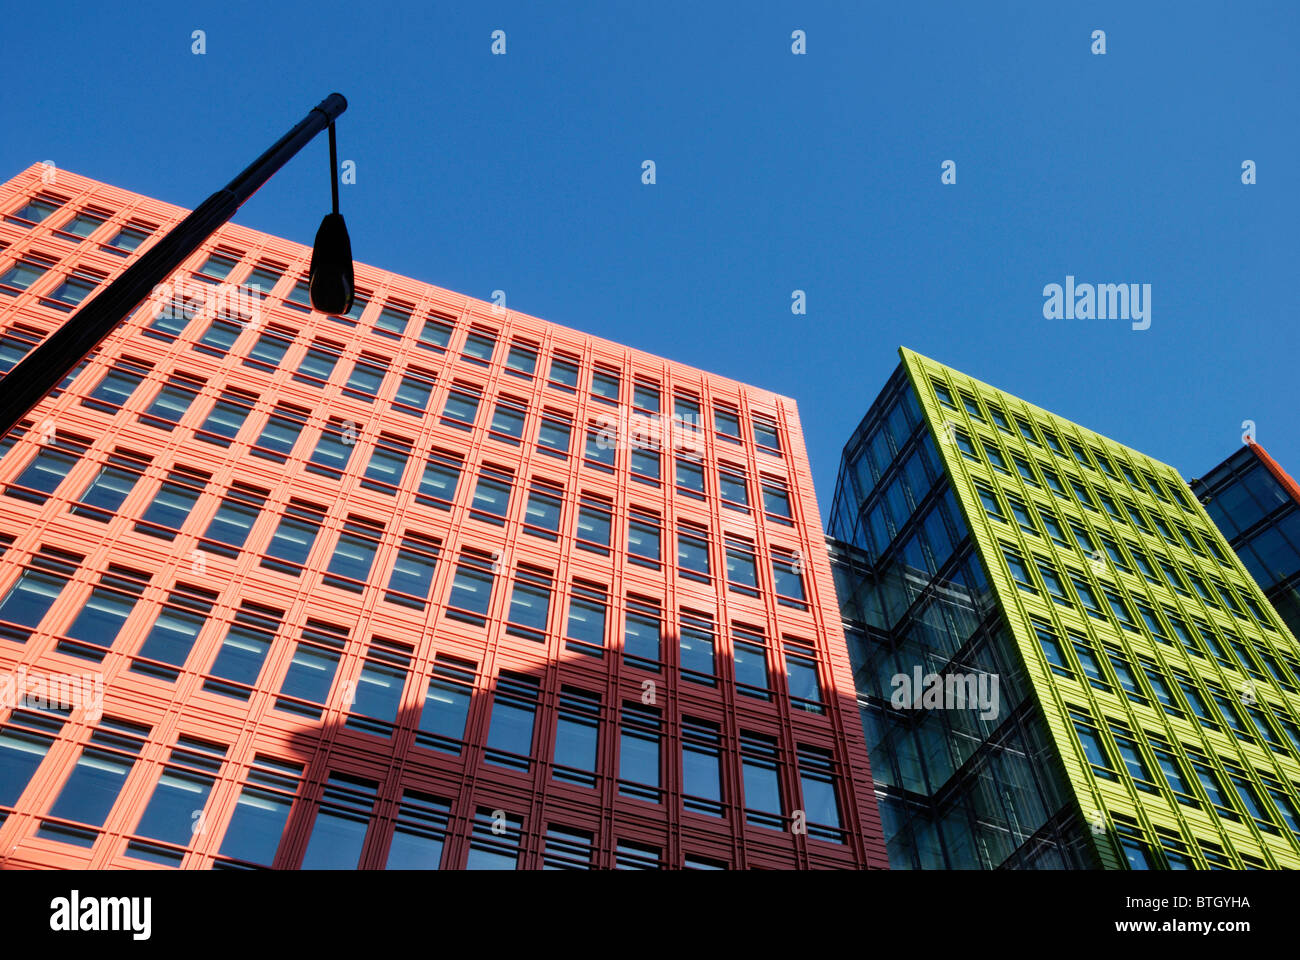 Google London offices at Central St Giles, London, England. Stock Photo